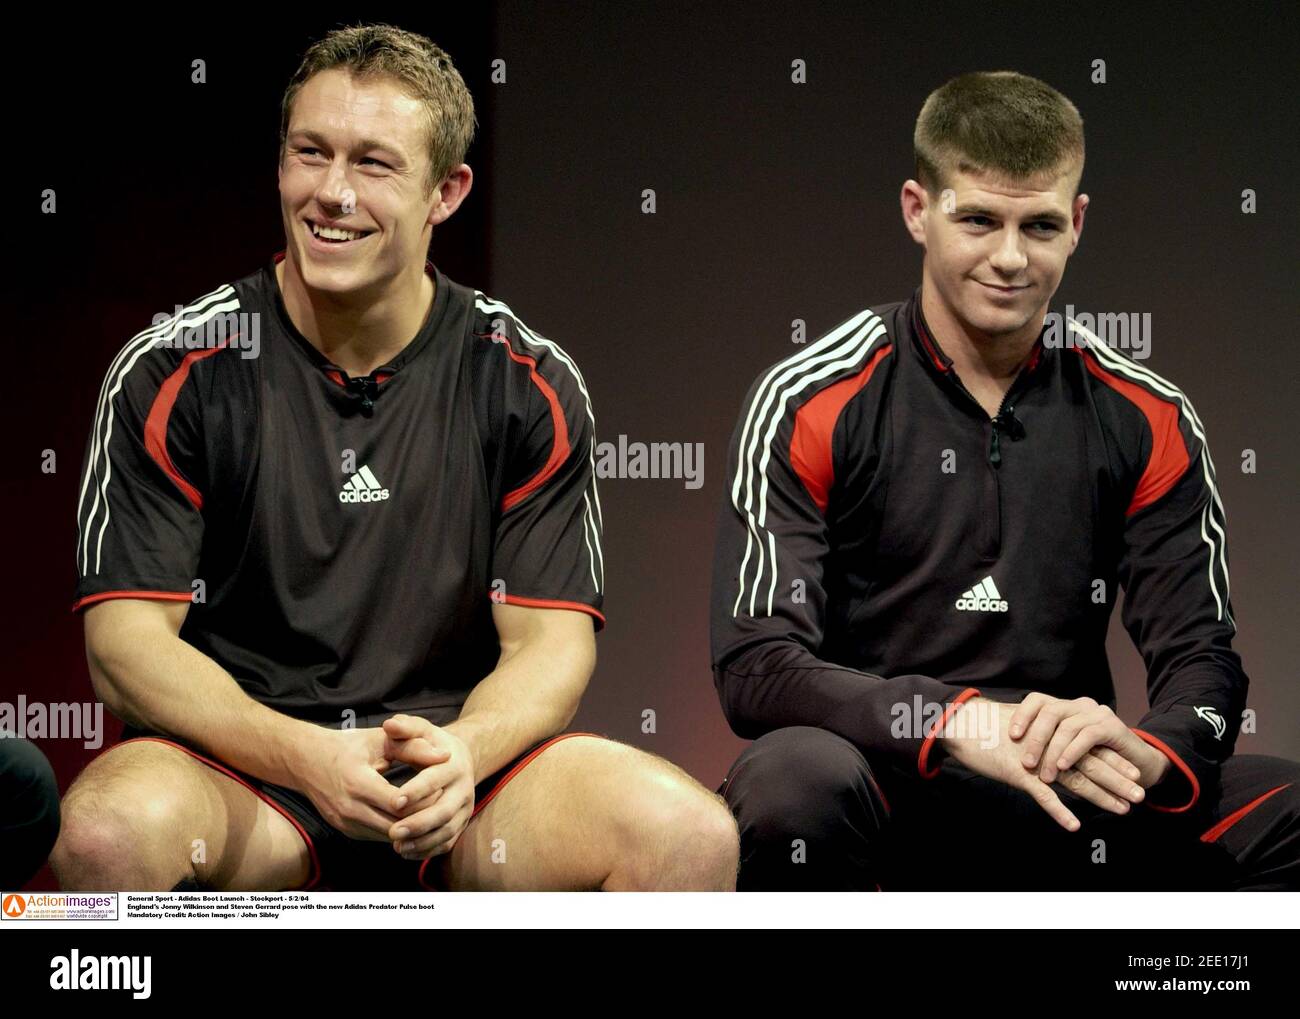 General Sport - Adidas Boot Launch - Stockport - 5/2/04 England's Jonny  Wilkinson and Steven Gerrard pose with the new Adidas Predator Pulse boot  Mandatory Credit: Action Images / John Sibley Stock Photo - Alamy